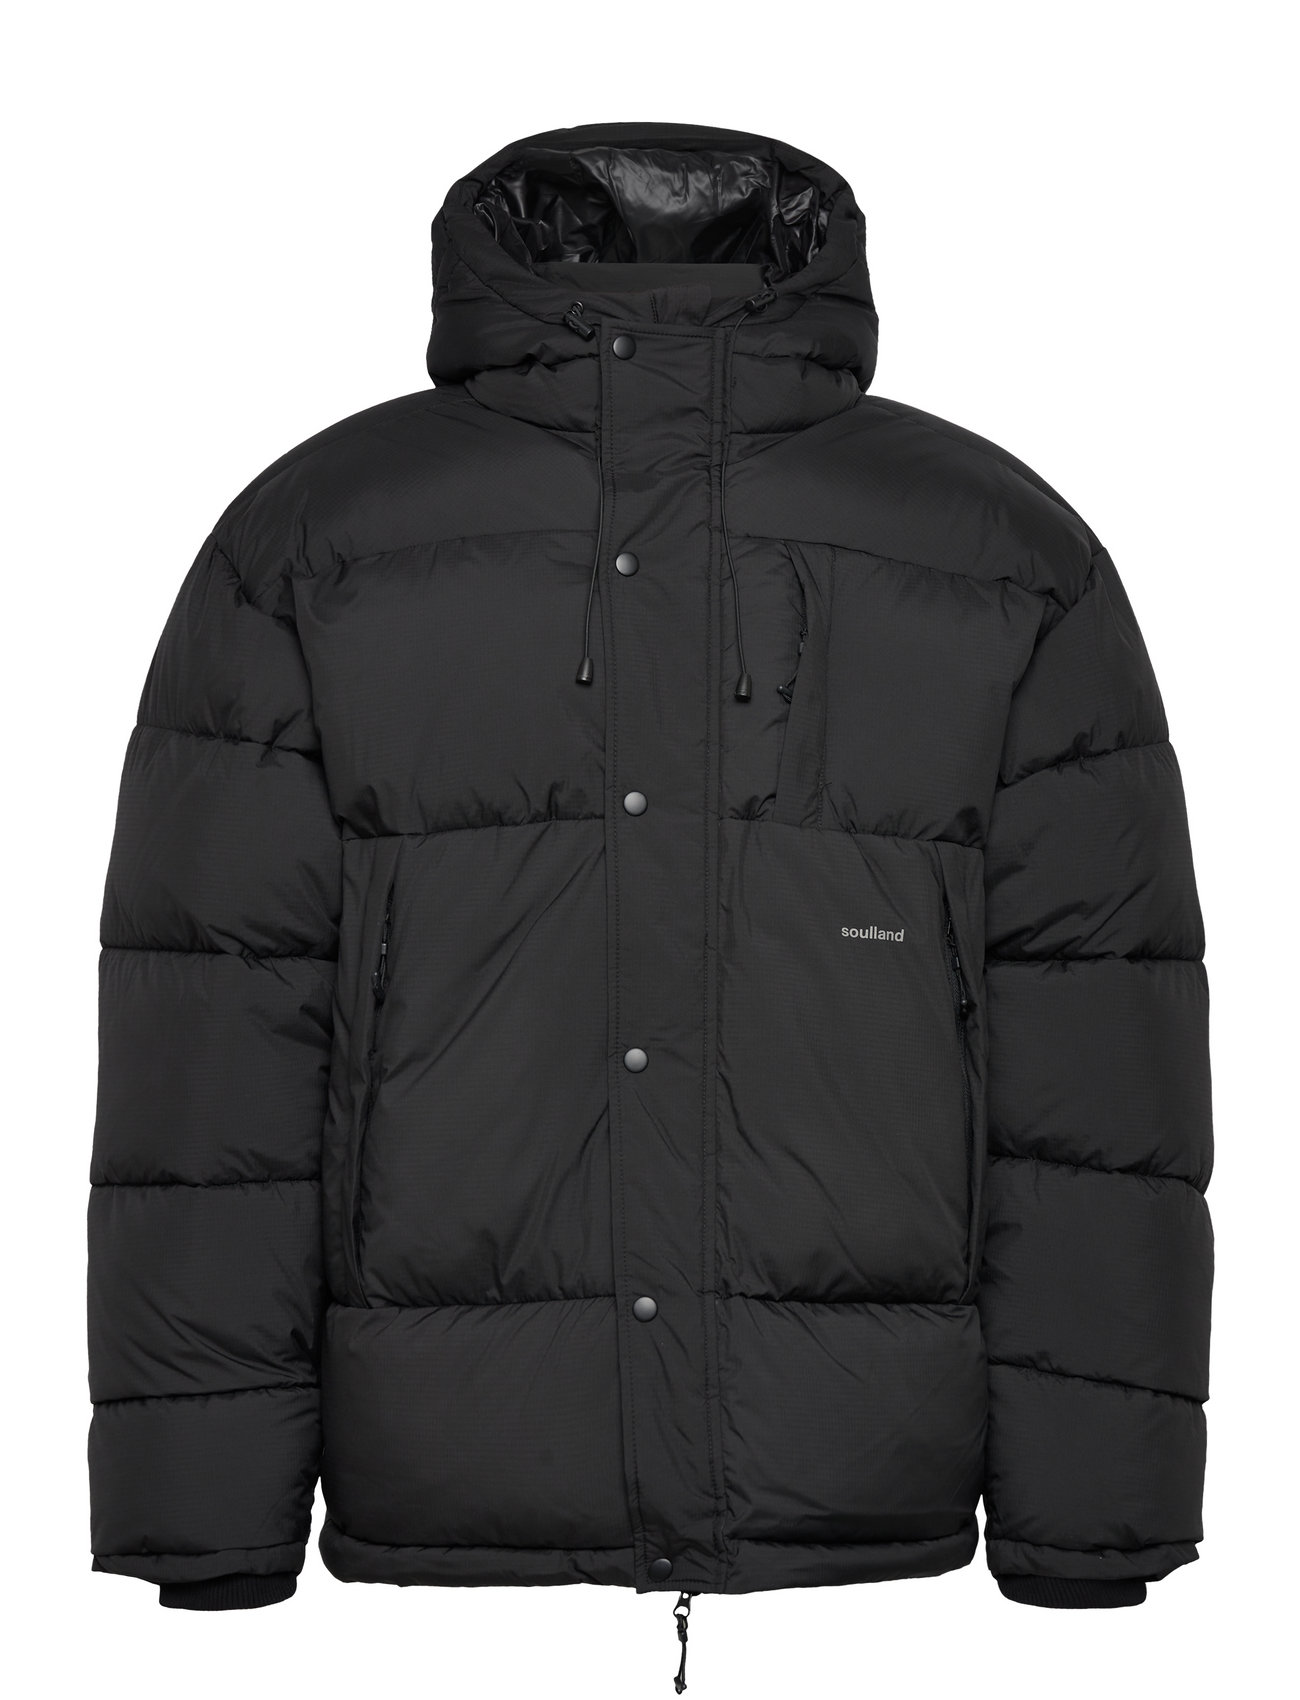 Soulland Ian Jacket - 540 €. Buy Padded jackets from Soulland online at ...